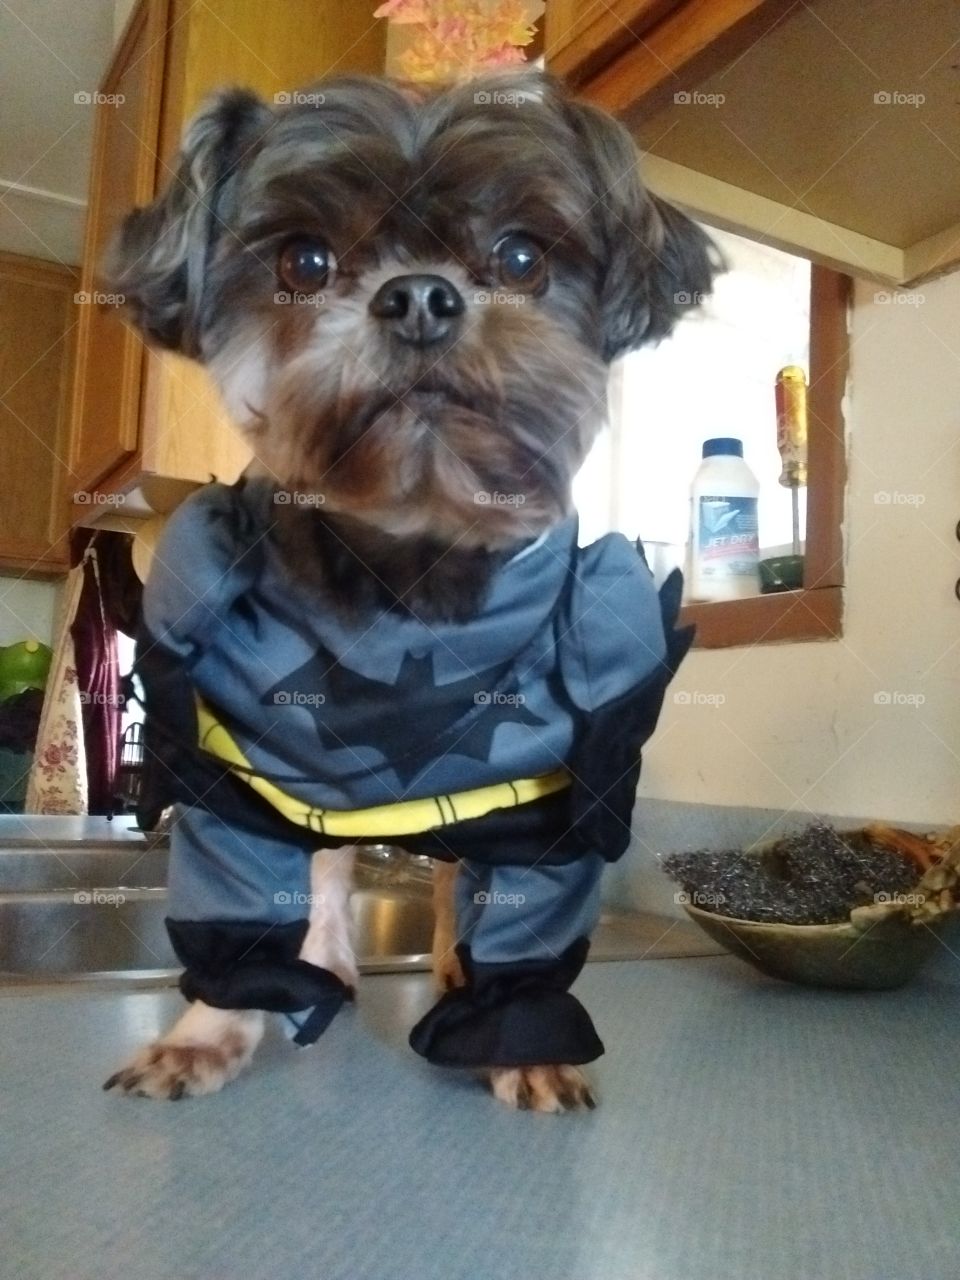 he doesn't like to wear costumes, so he was bribed with treats and stuck on the counter until I got a decent picture :)